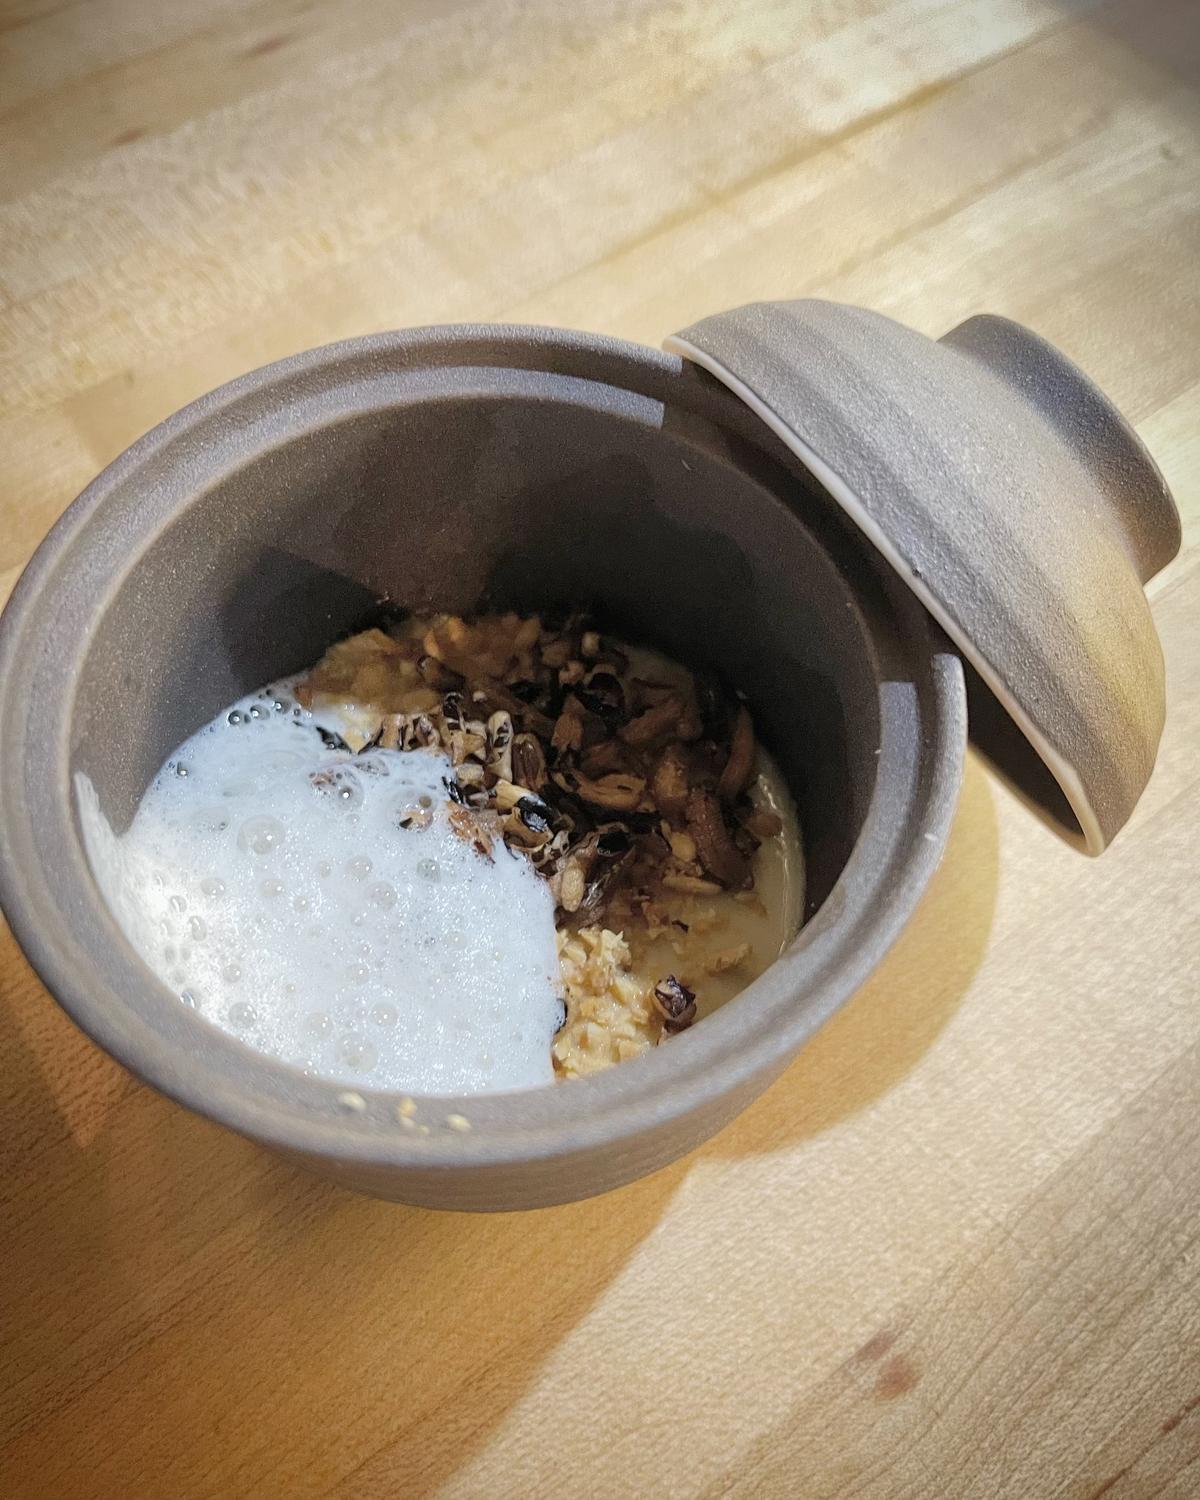 Sea truffle chawanmushi with toasted peanuts, puffed wild rice, and ginger-peanut cream sauce. (Courtesy of Stages at One Washington)